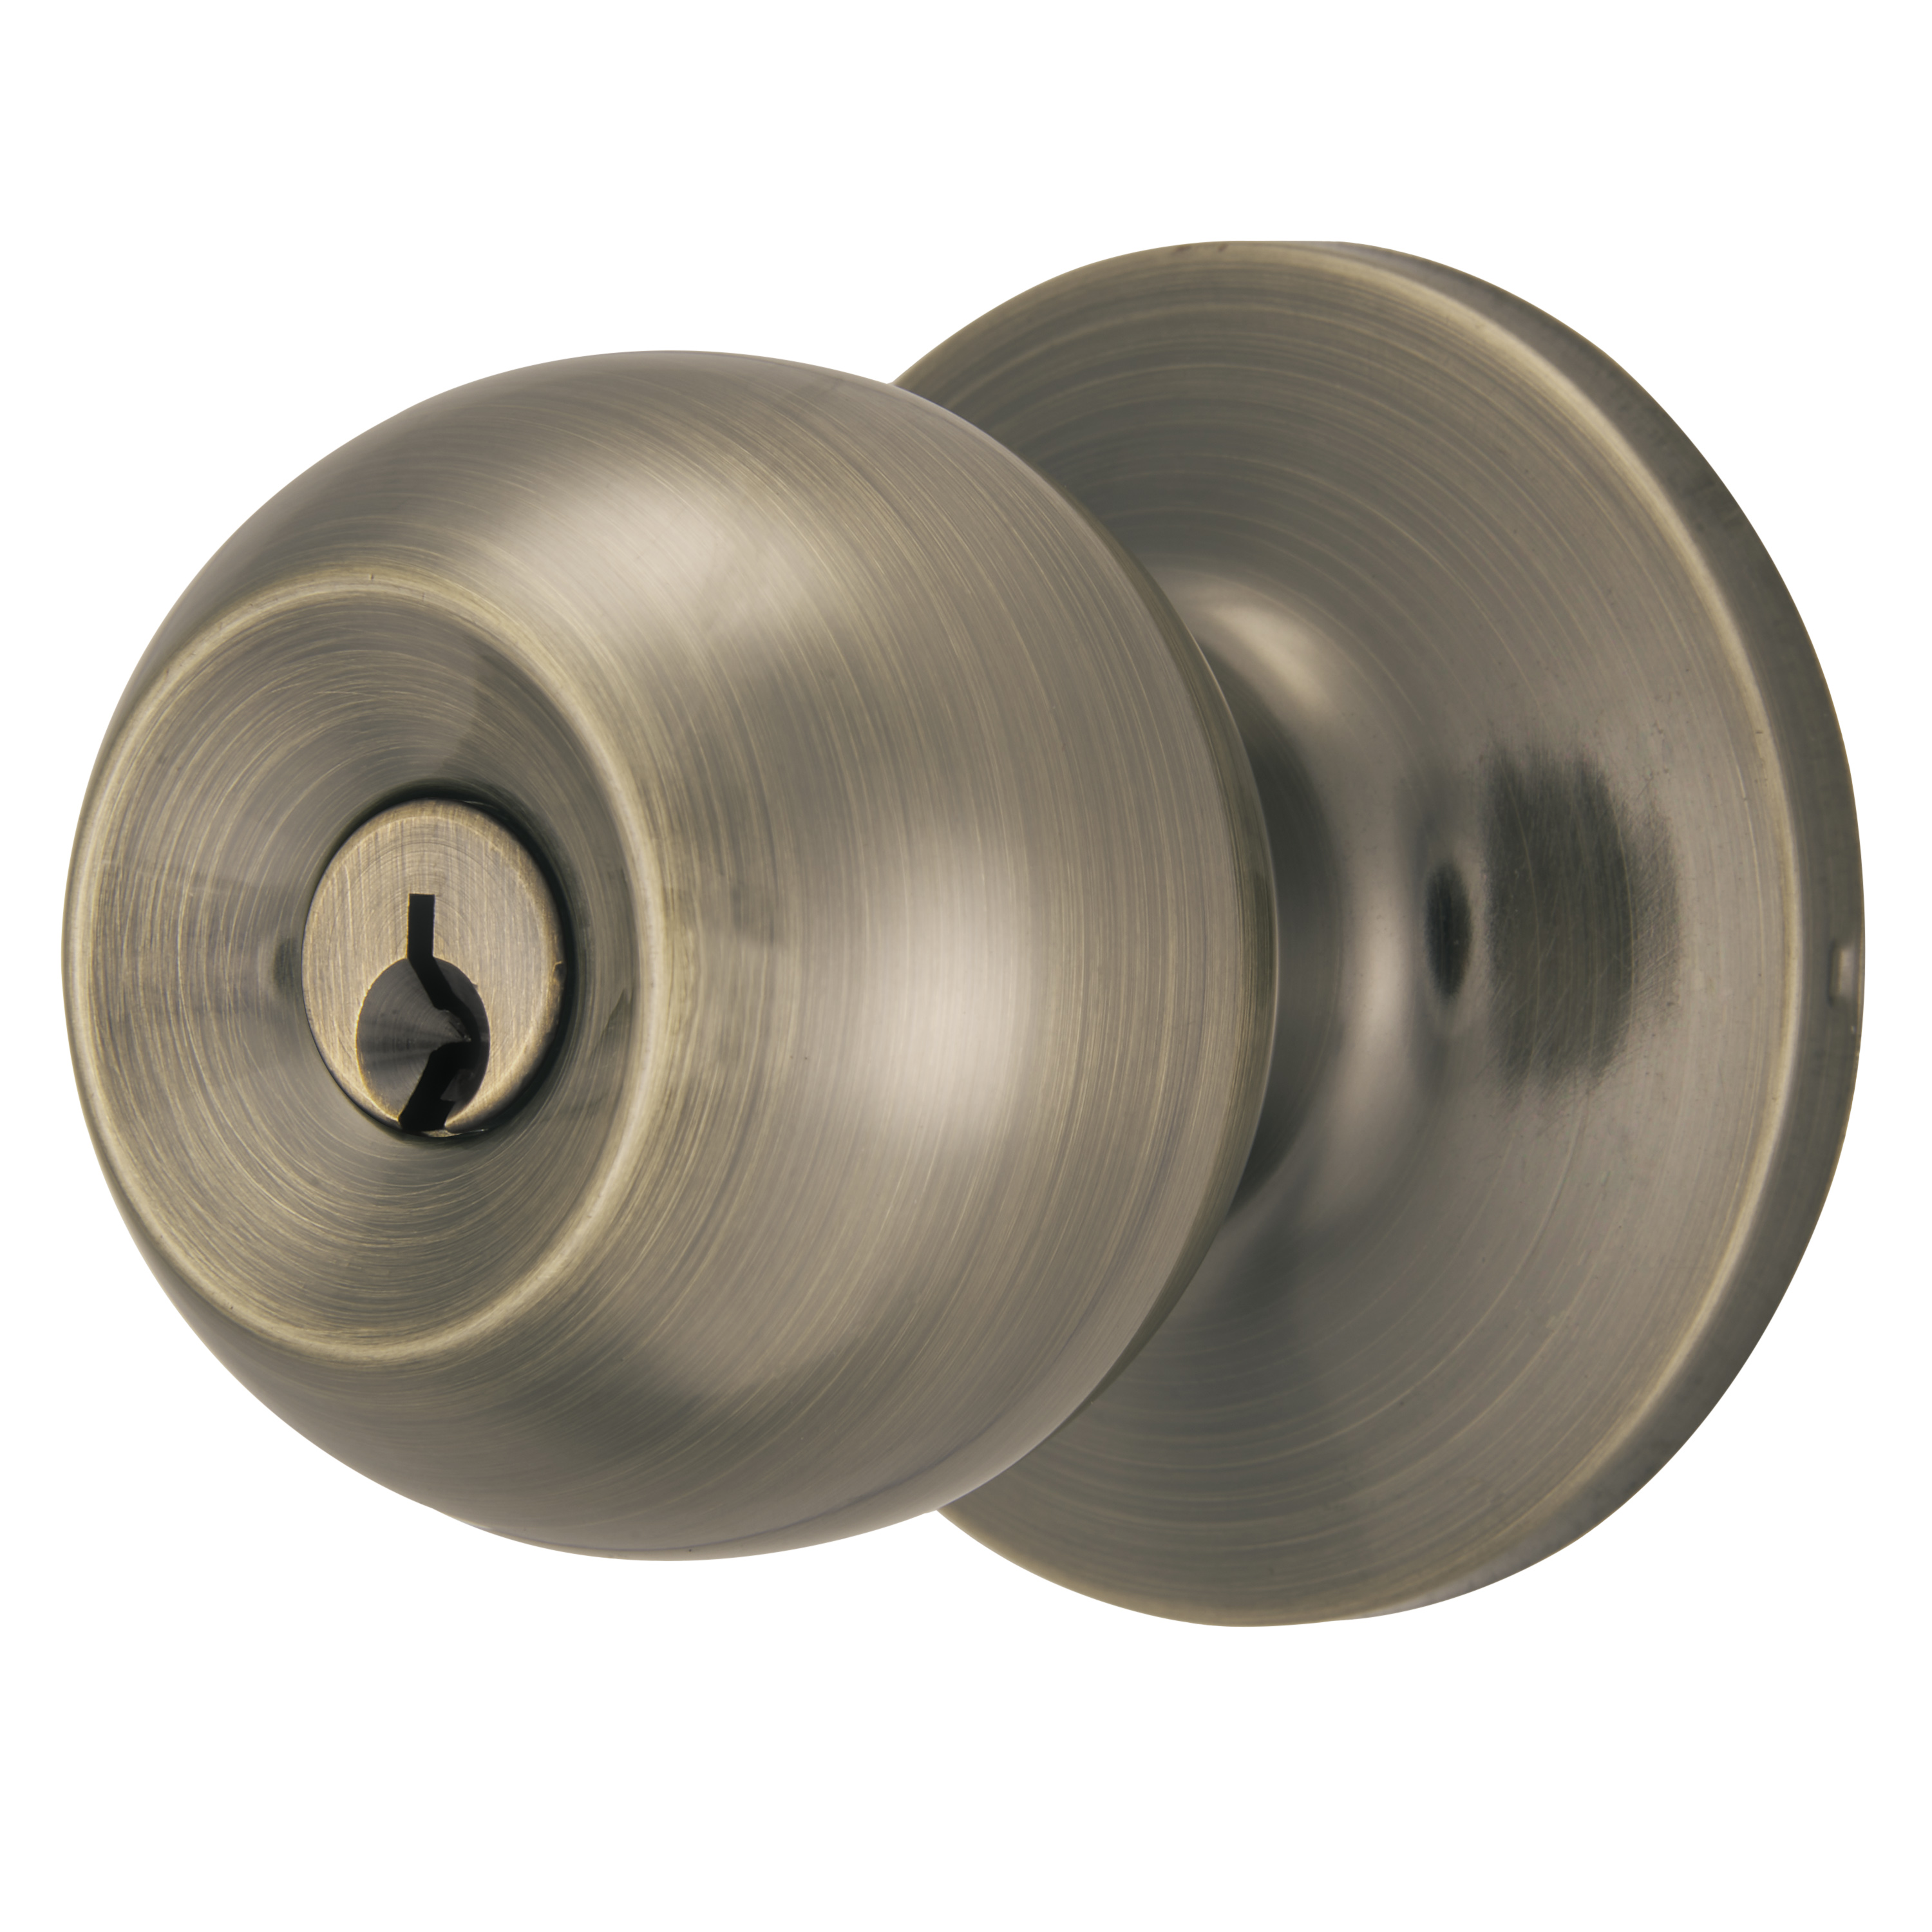 Brinks Keyed Entry Ball Style Doorknob and Deadbolt Combo, Antique Brass Finish, Twin Pack - image 2 of 15